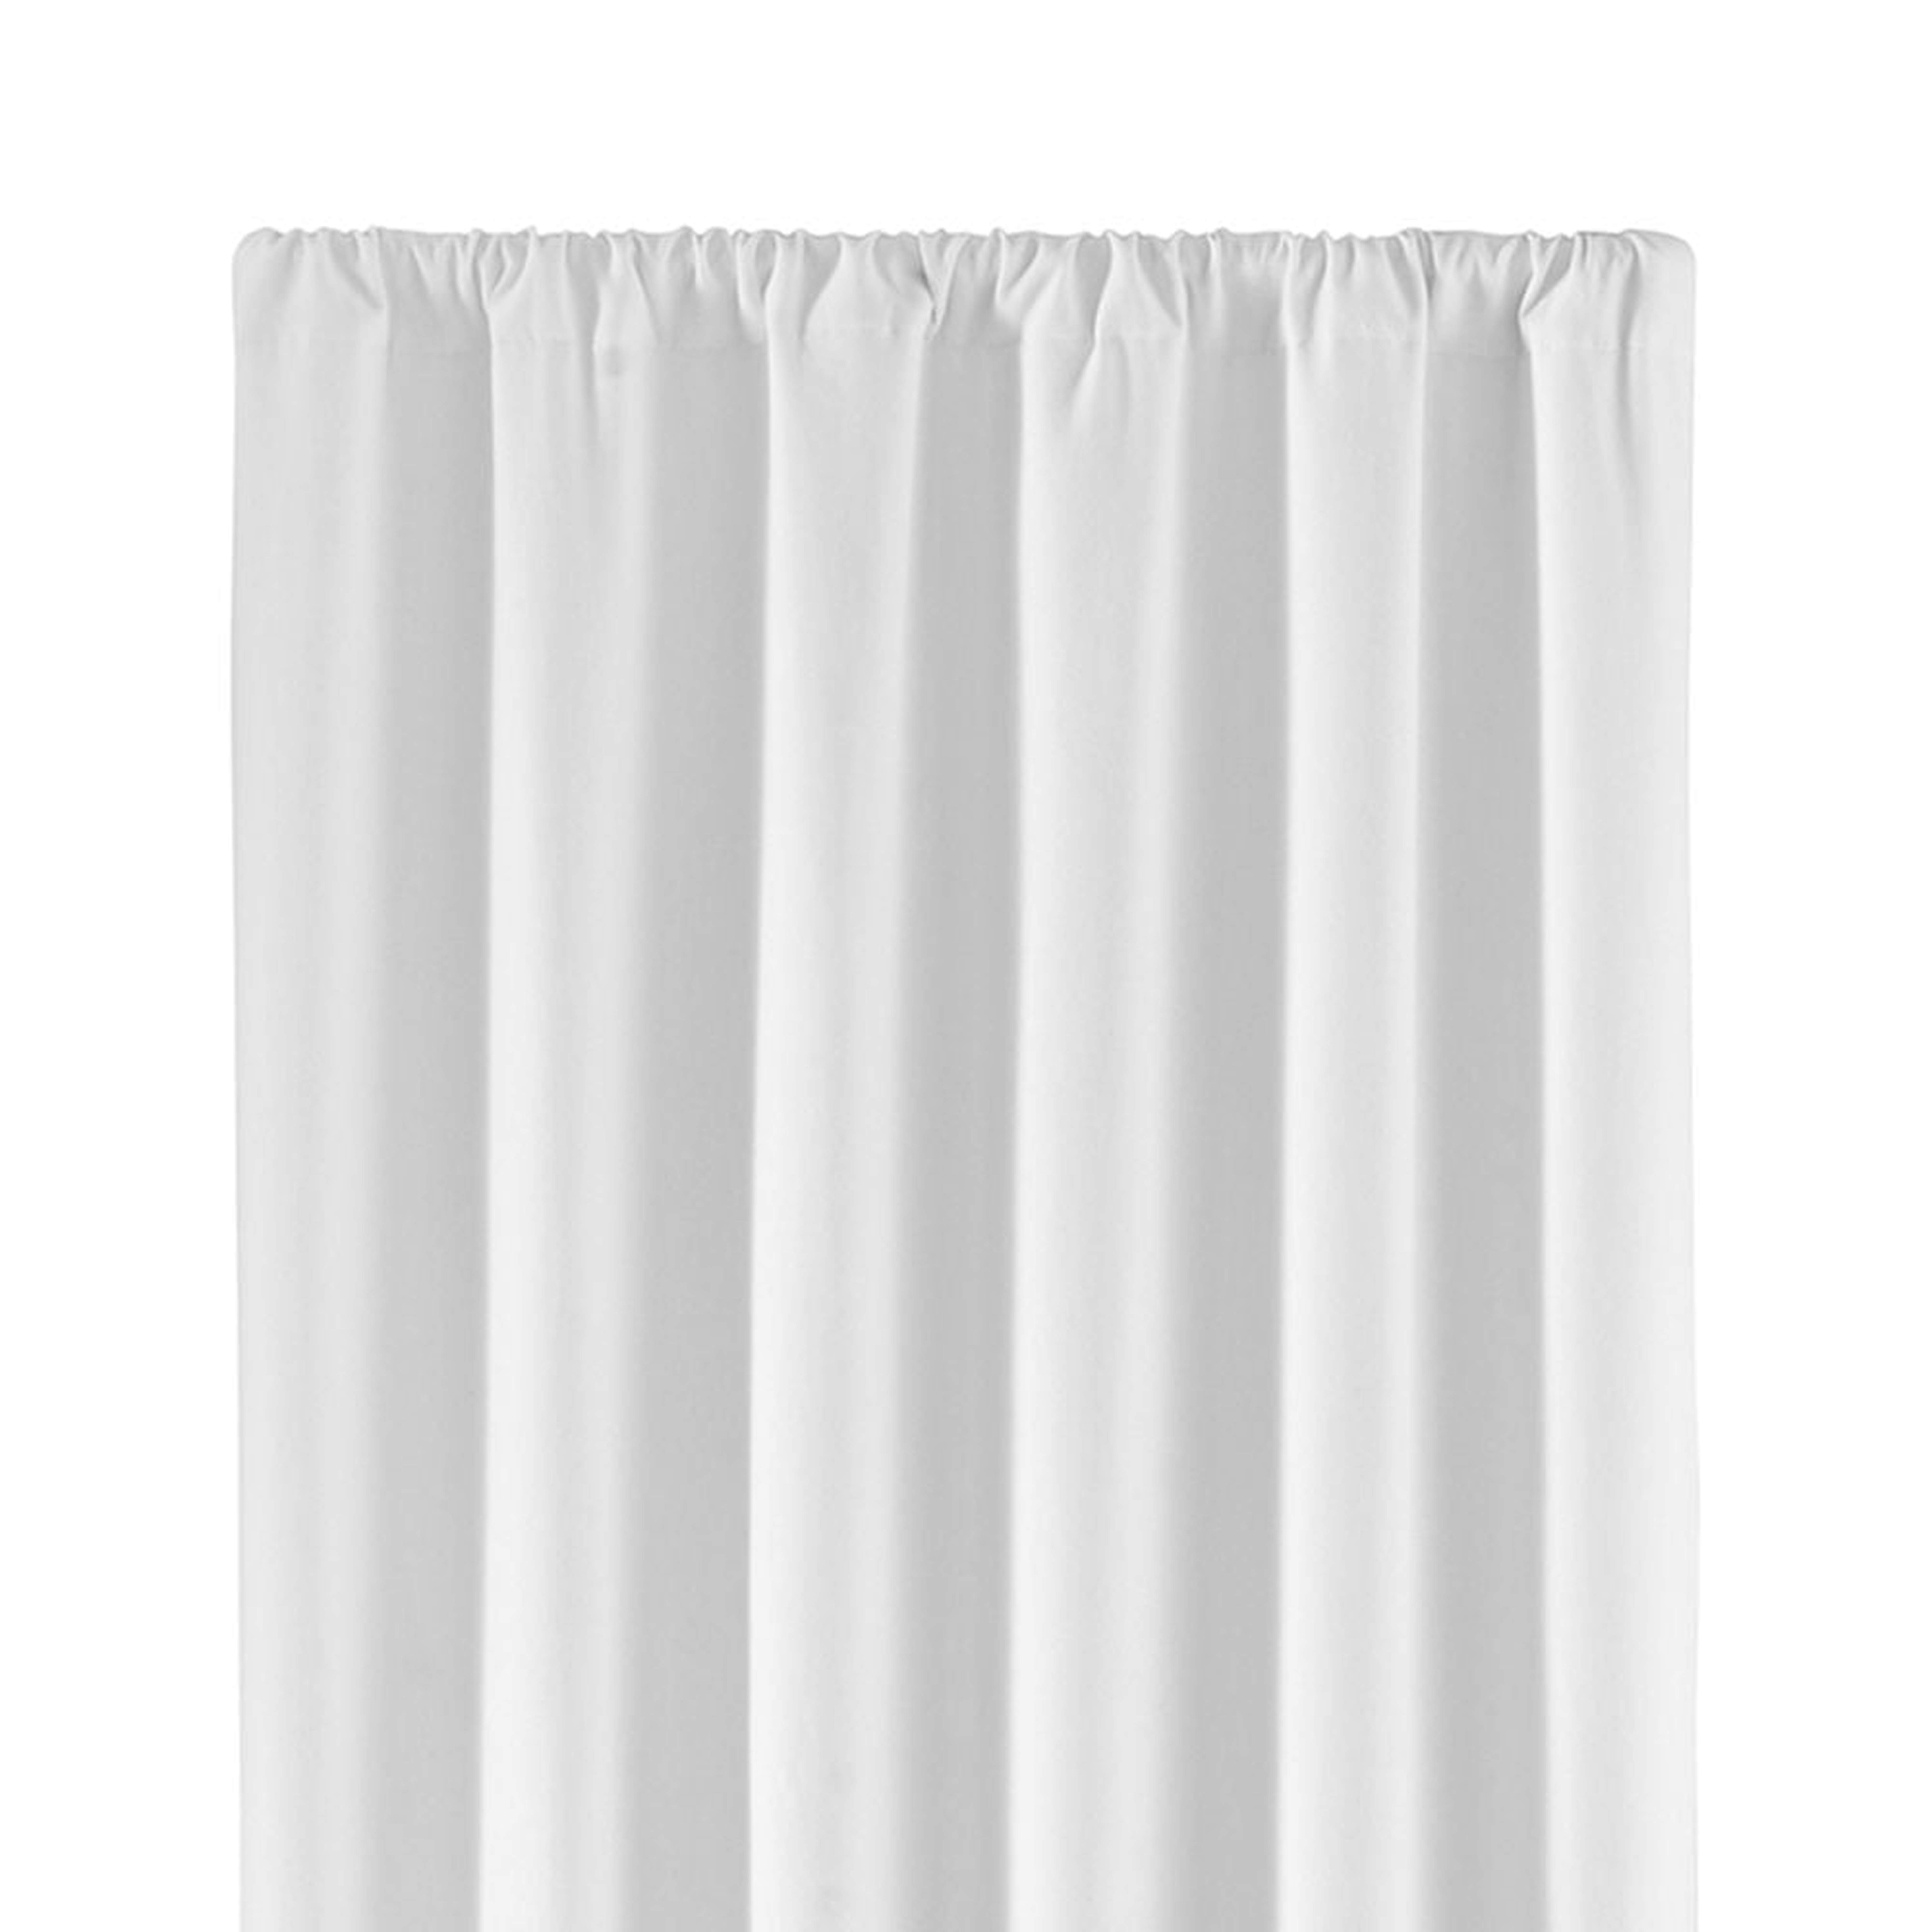 Wallace White Blackout Curtain Panel 52"x84" - Crate and Barrel